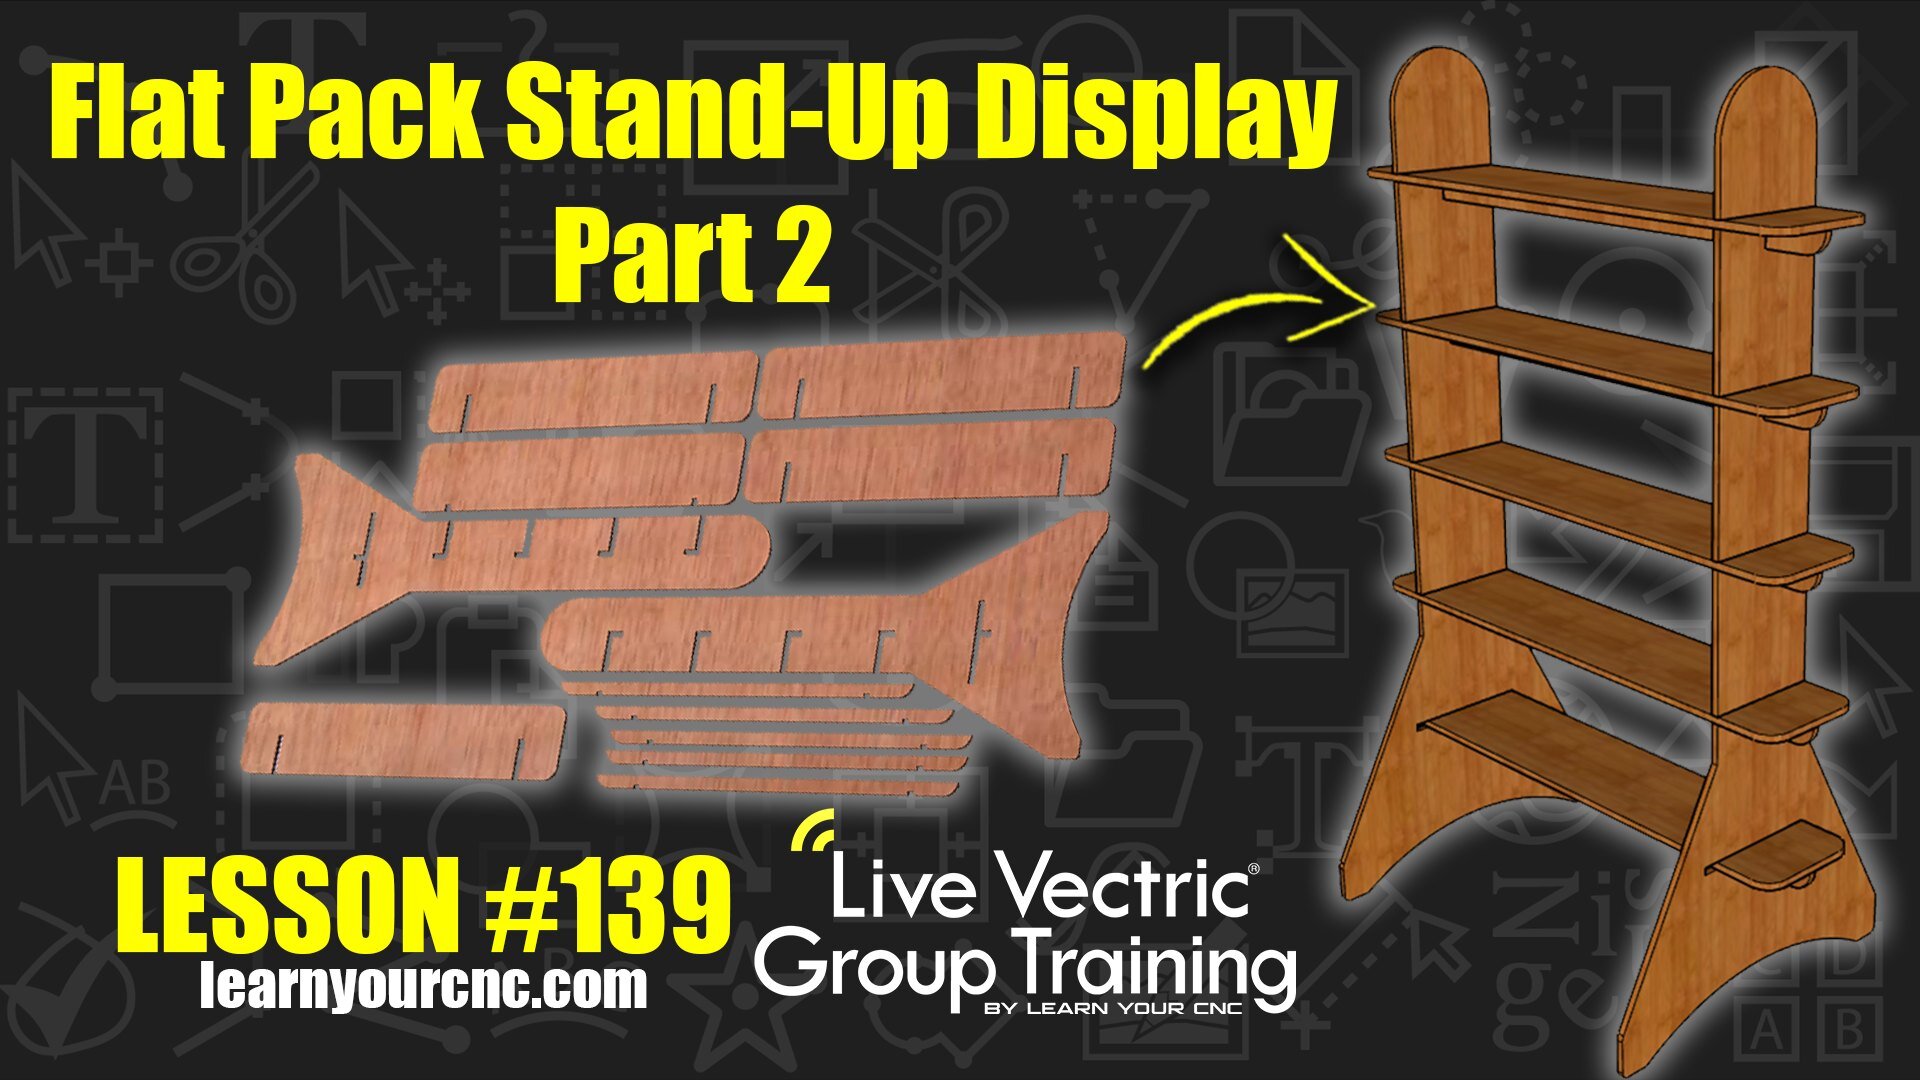 Thank you to everyone that showed up to our live Vectric training #139! In this training, we learned part 2 of designing a stand-up &quot;flat pack&quot; display shelf unit that can be used in a vendor event or a wide variety of other uses. As always